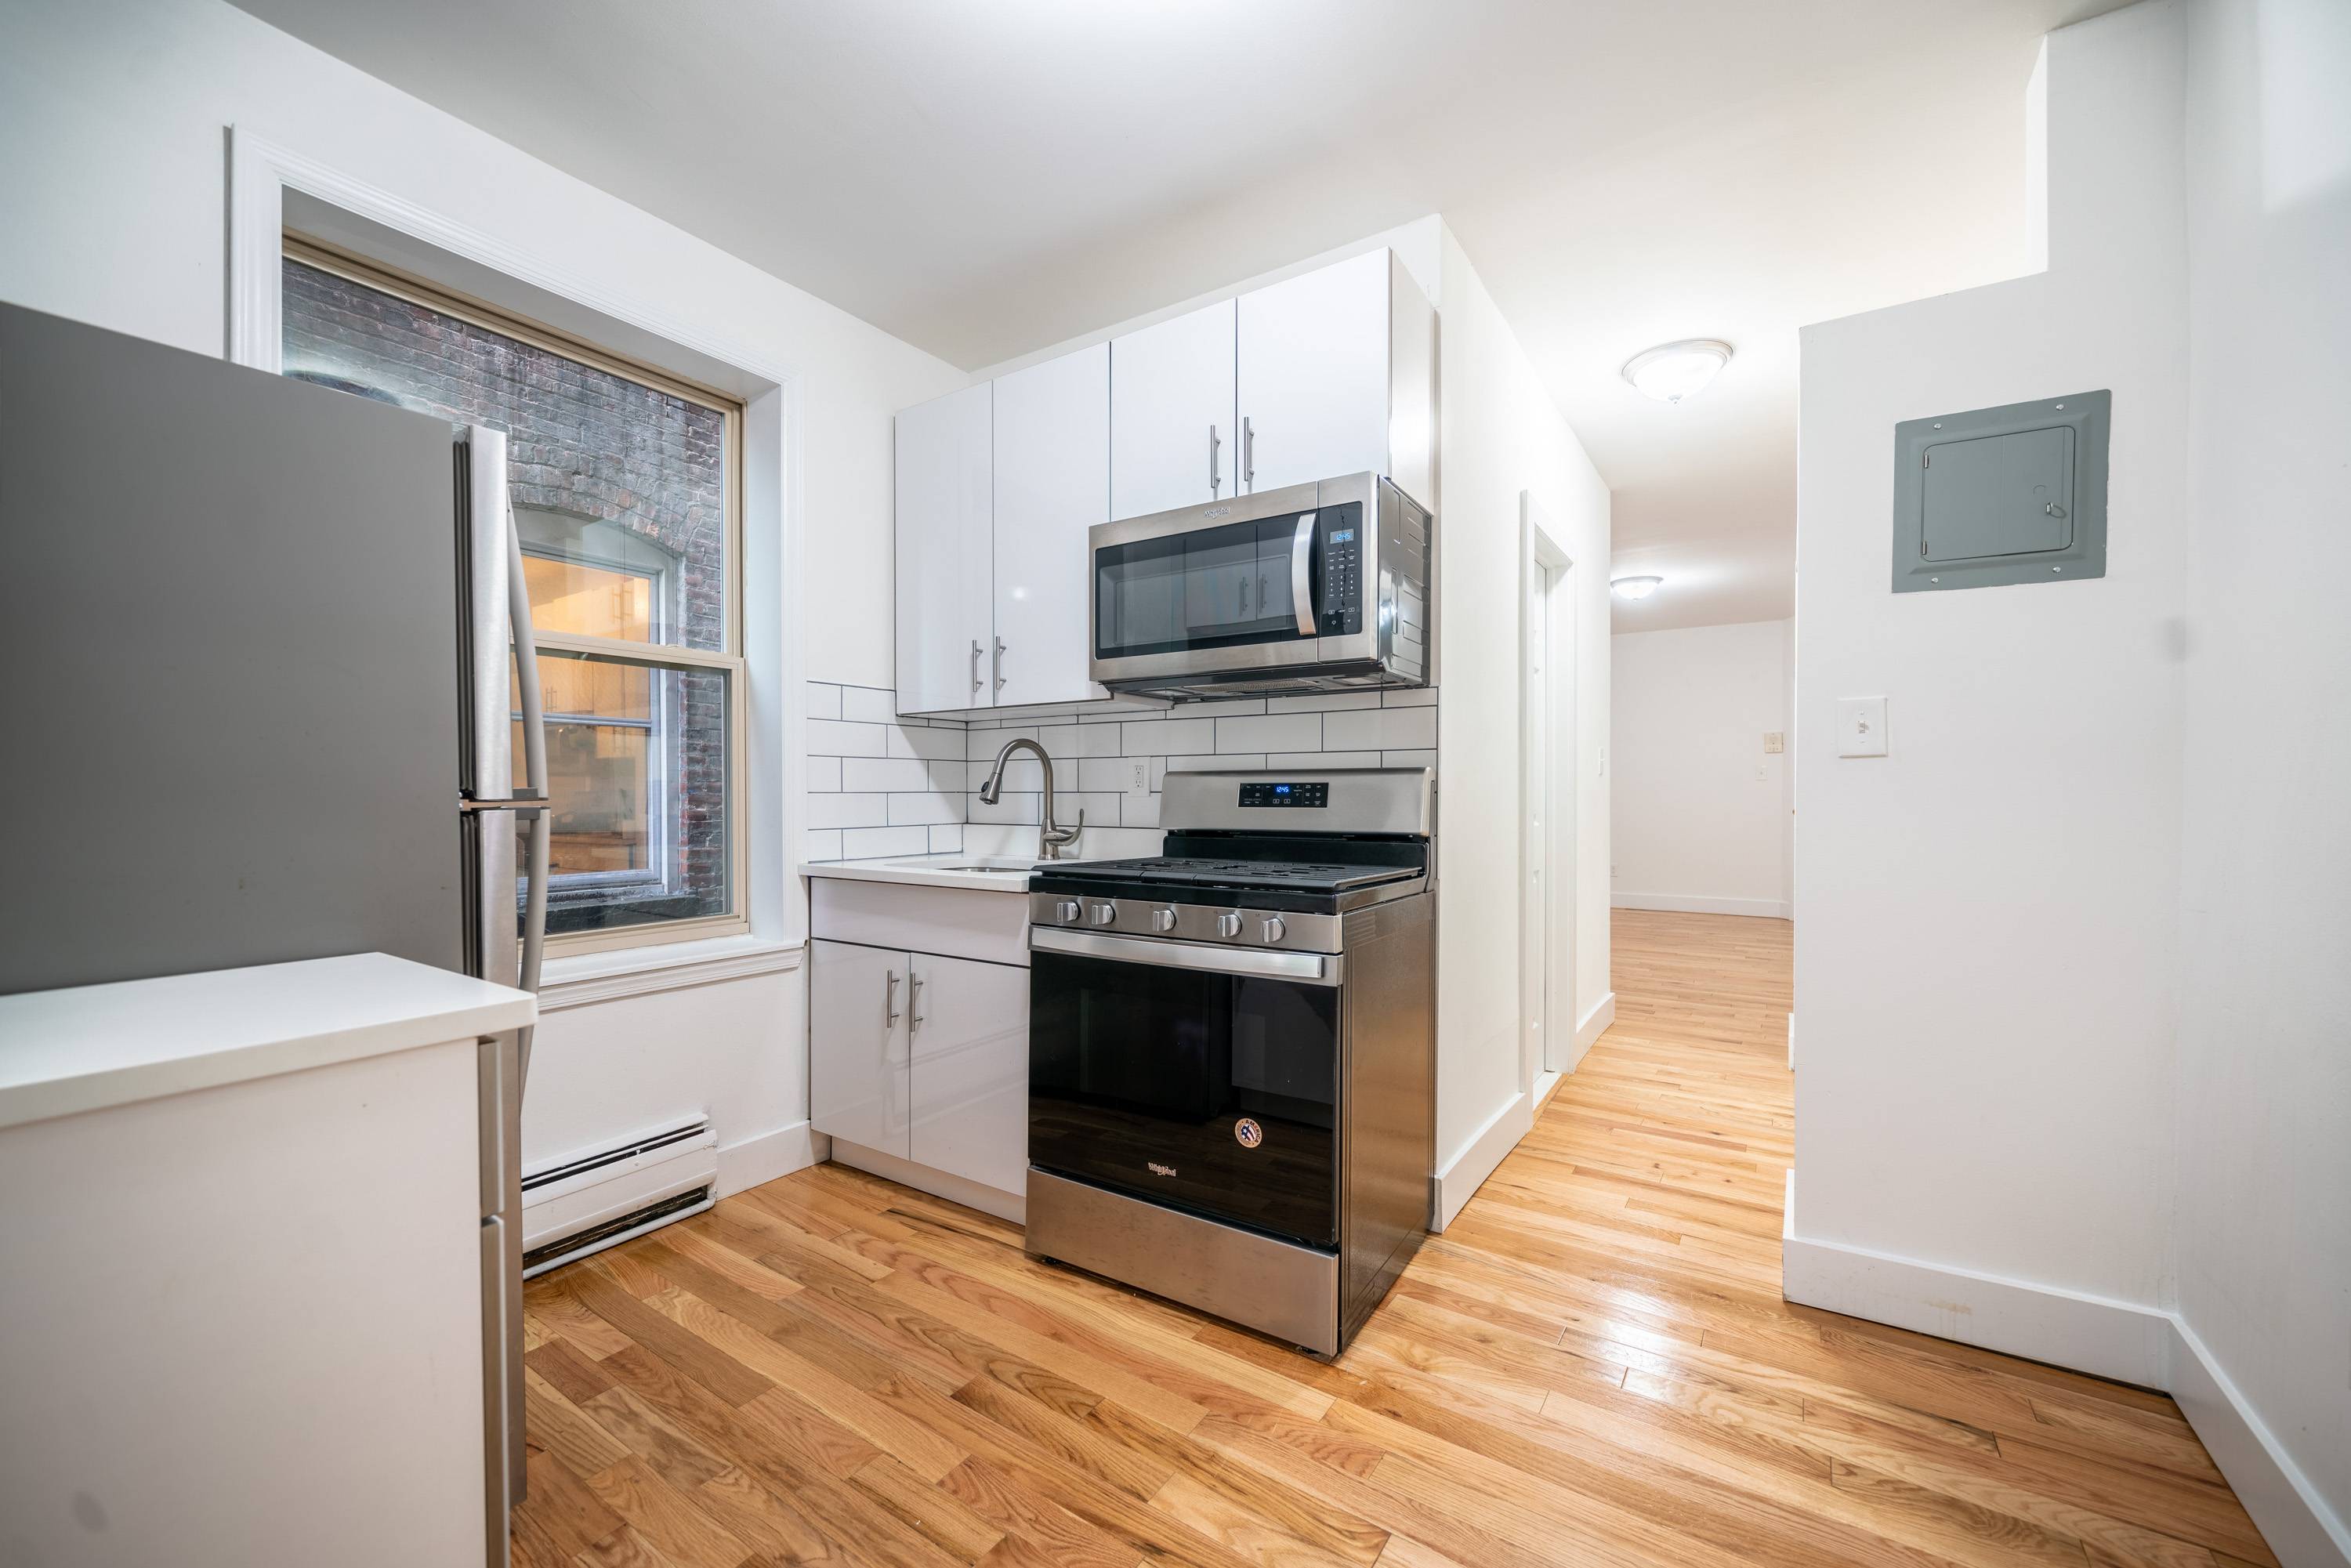 Stunning Renovated 1BR Located Across the Street from the Journal Square Transportation Center and Path Station!  Laundry On Site, On Site Super, No Broker Fees.